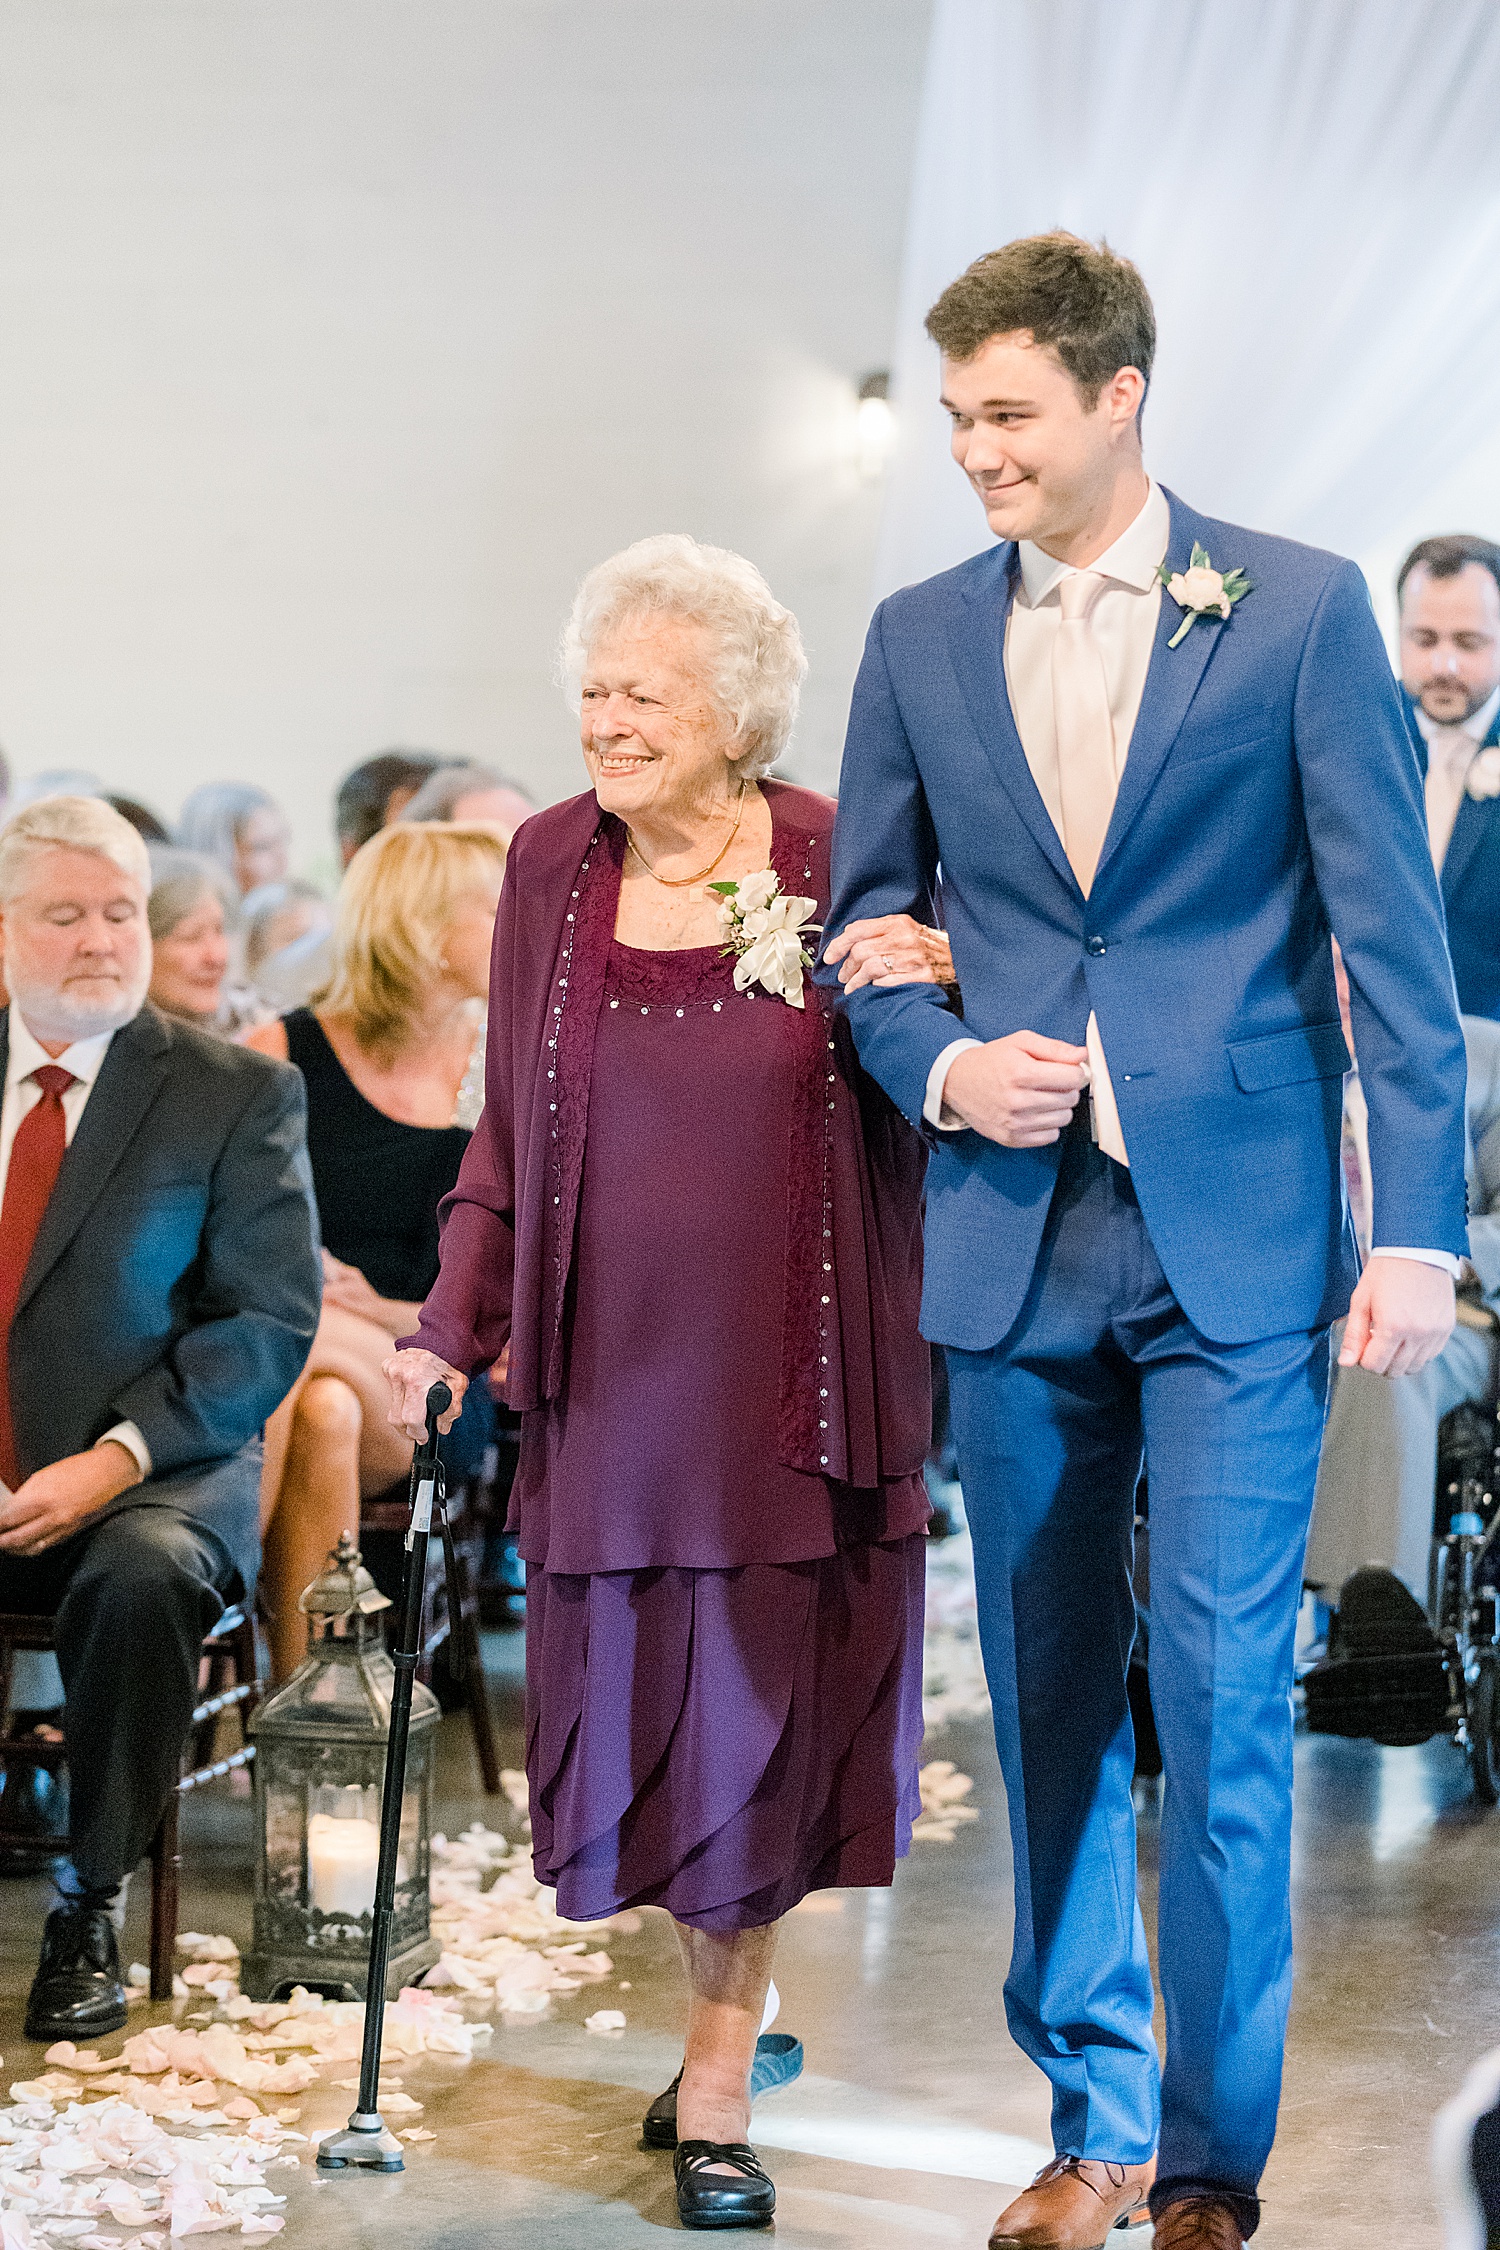 grandmother takes seat at Wedding ceremony at The Barn at Shady Lane in Birmingham, AL